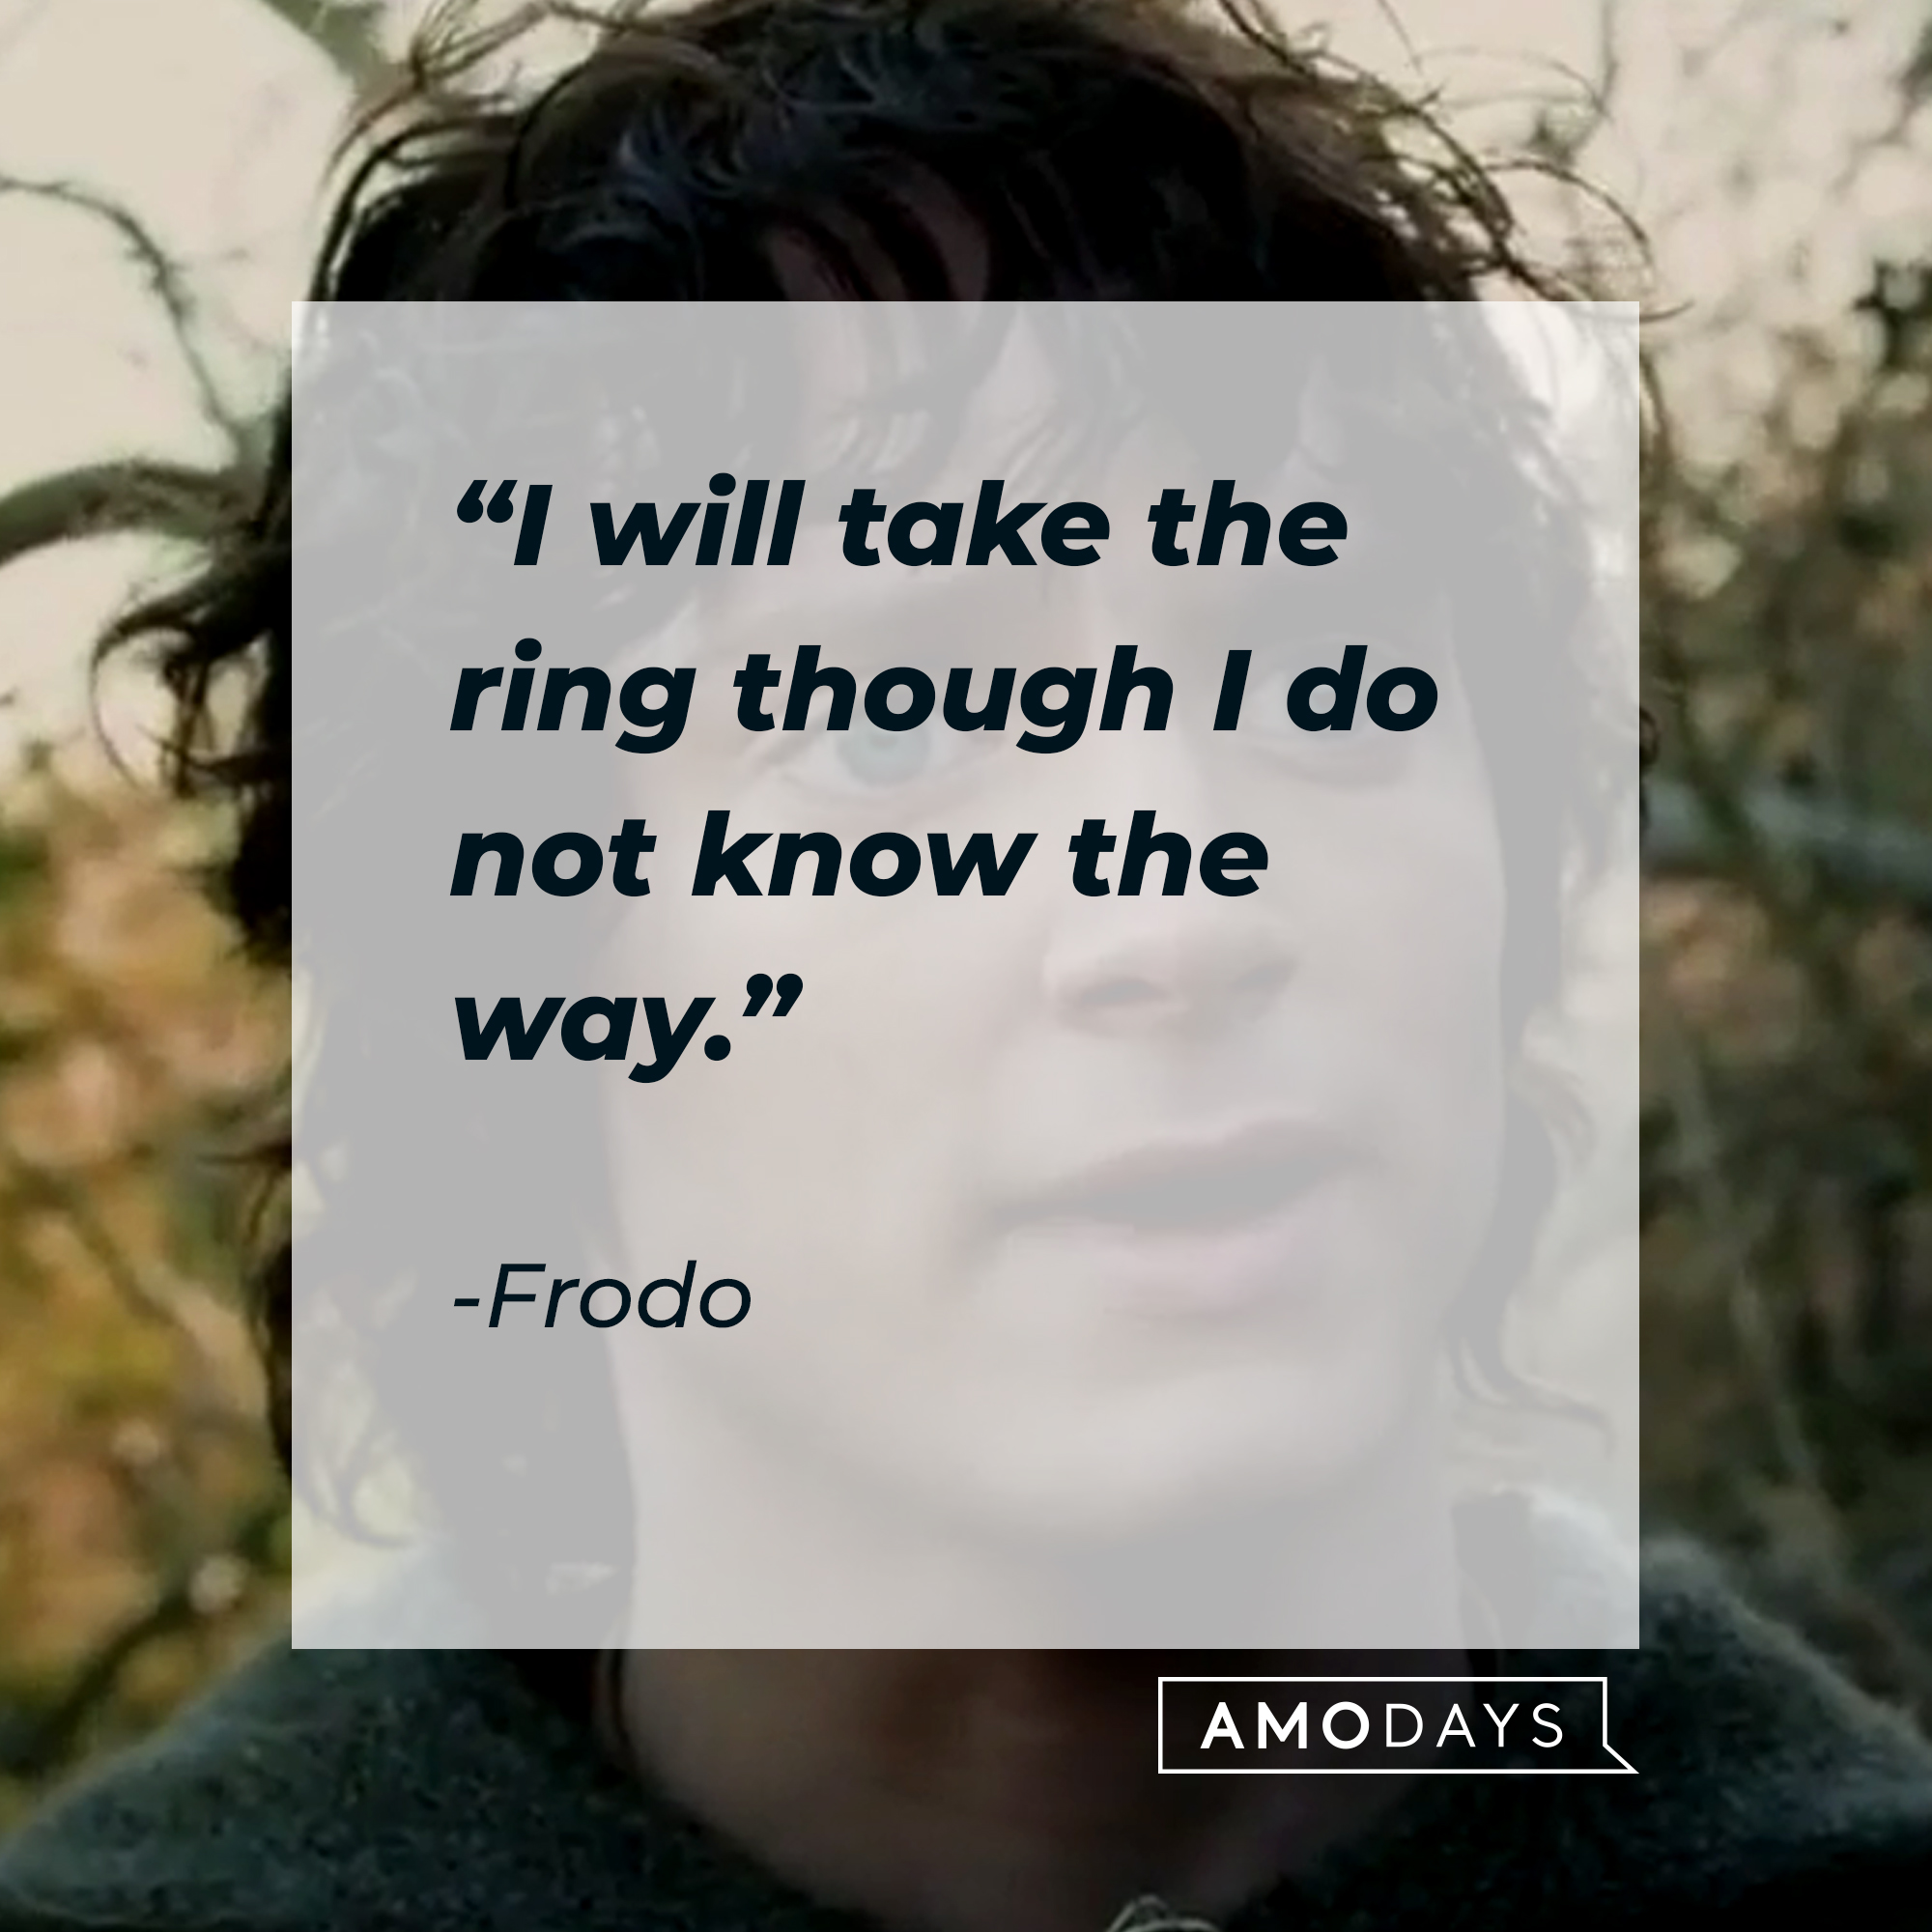 A photo of Frodo Baggins with the quote, "I will take the ring though I do not know the way." | Source: Facebook/lordoftheringstrilogy